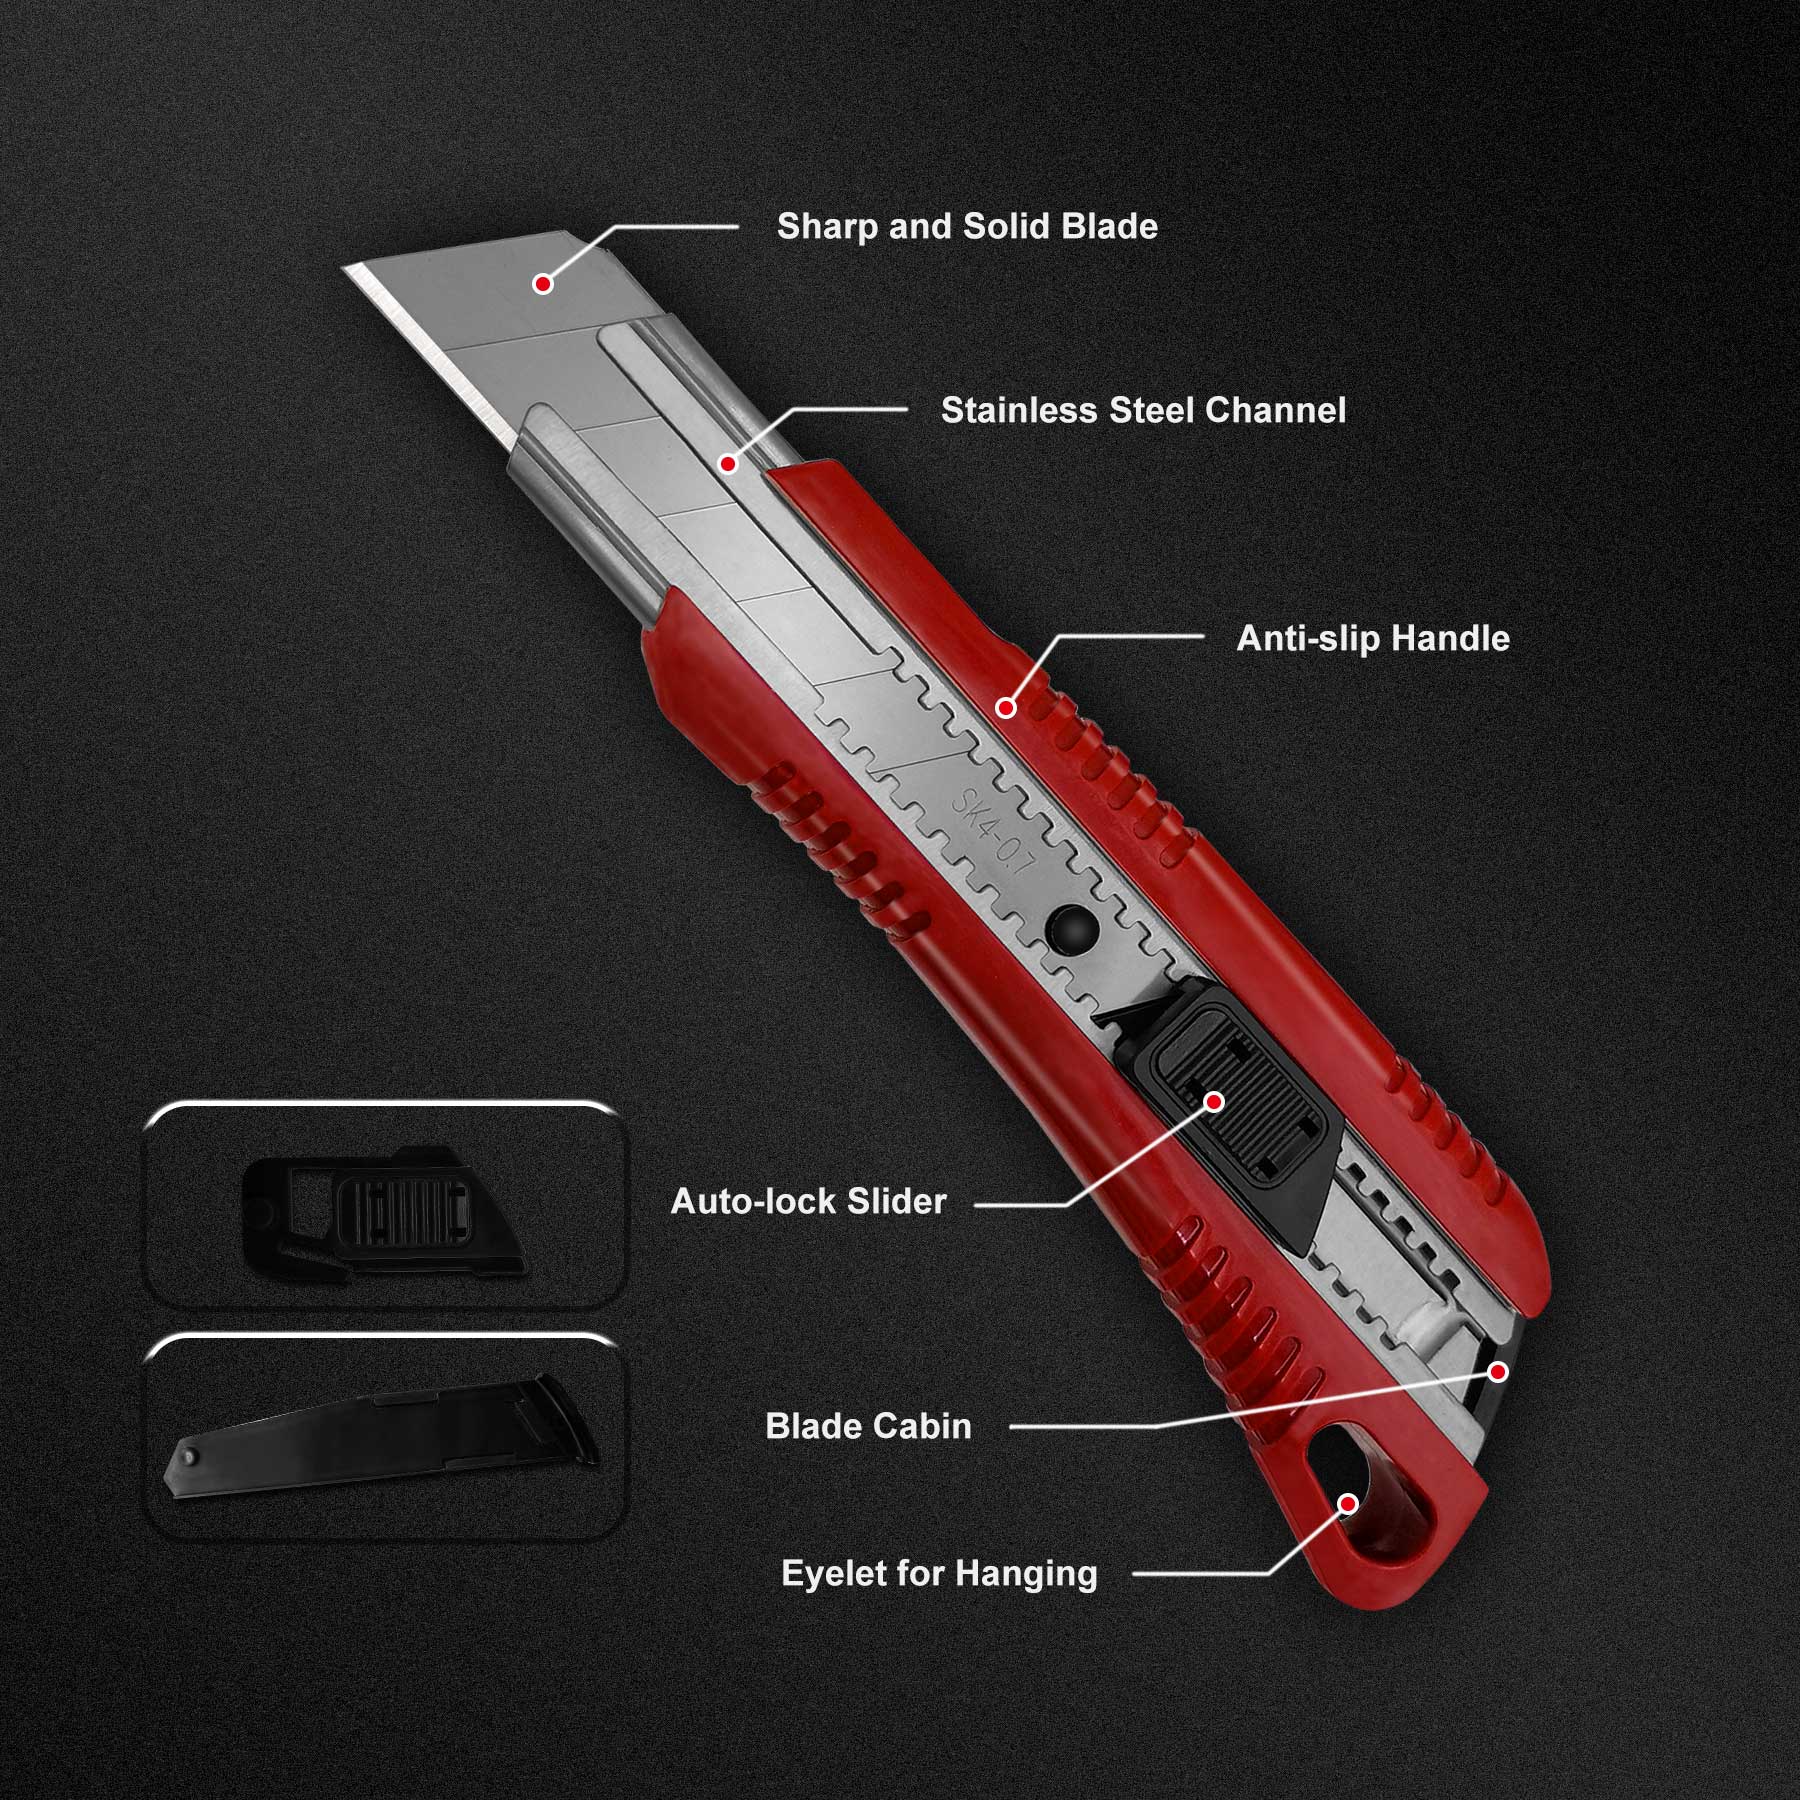 Utility Knives  Medium And Heavy Duty NT Cutters With ABS Handles.